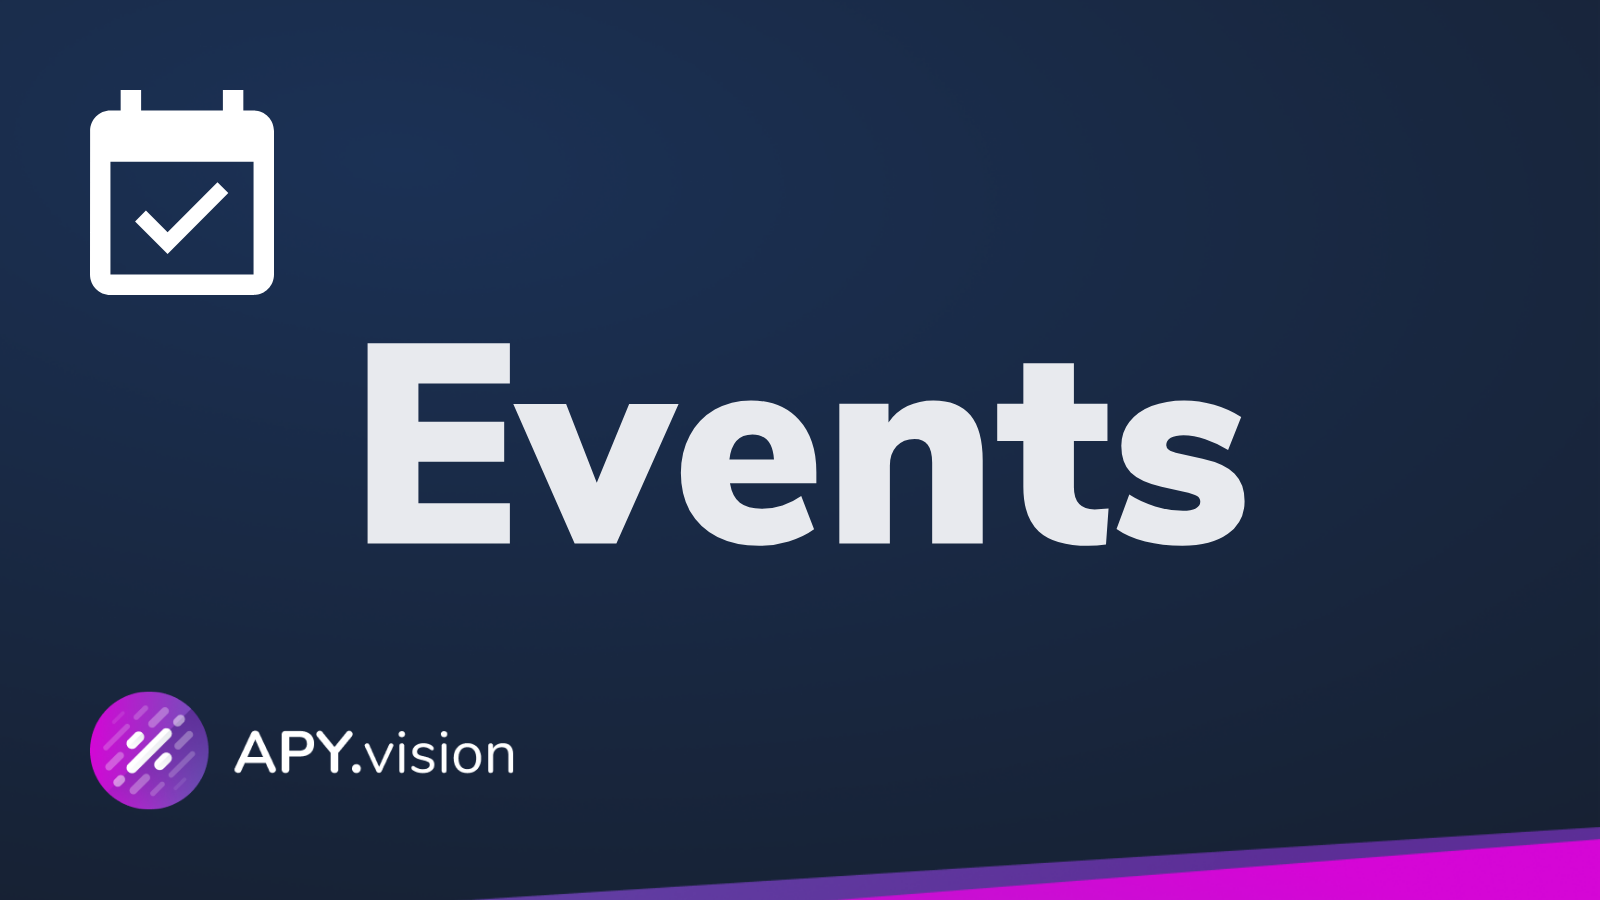 Events and Calendar